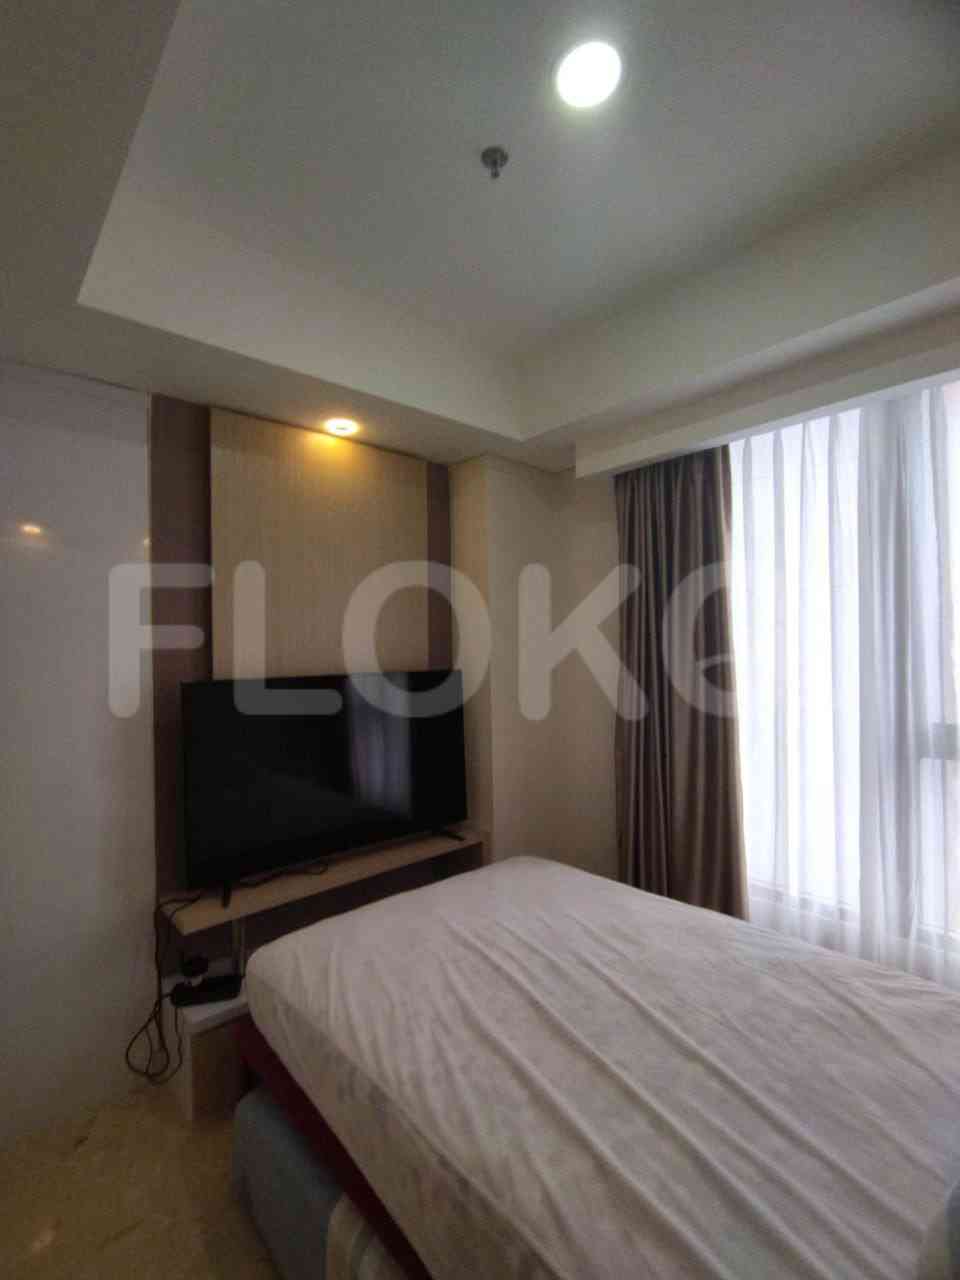 3 Bedroom on 25th Floor for Rent in Gold Coast Apartment - fka079 4